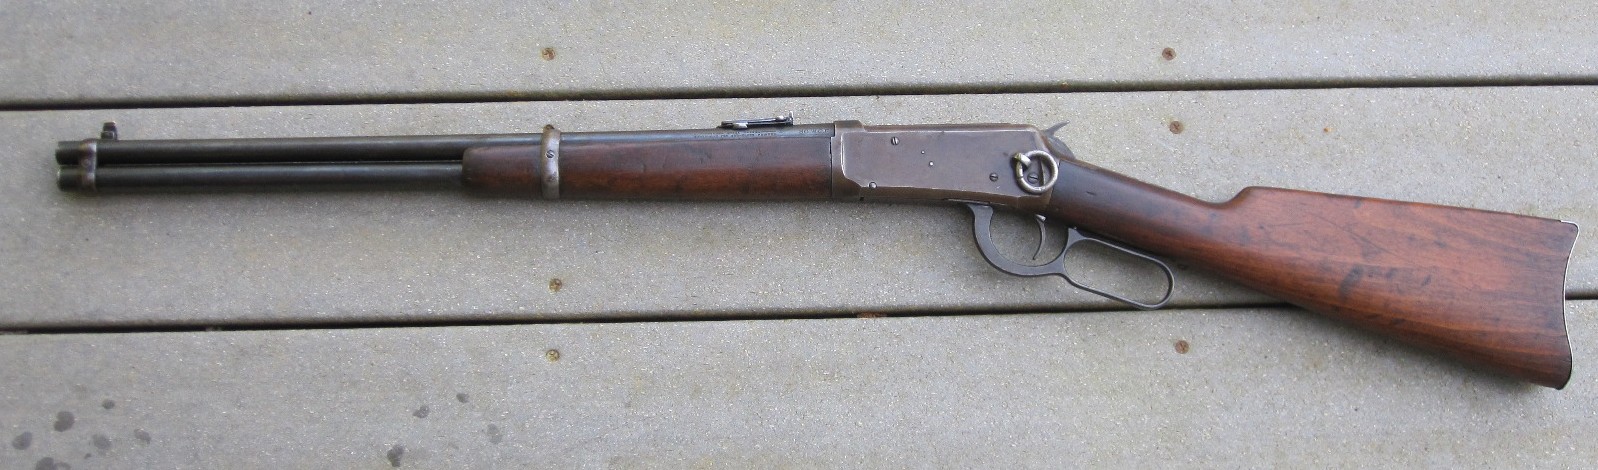 Example Special Winchester Rifle